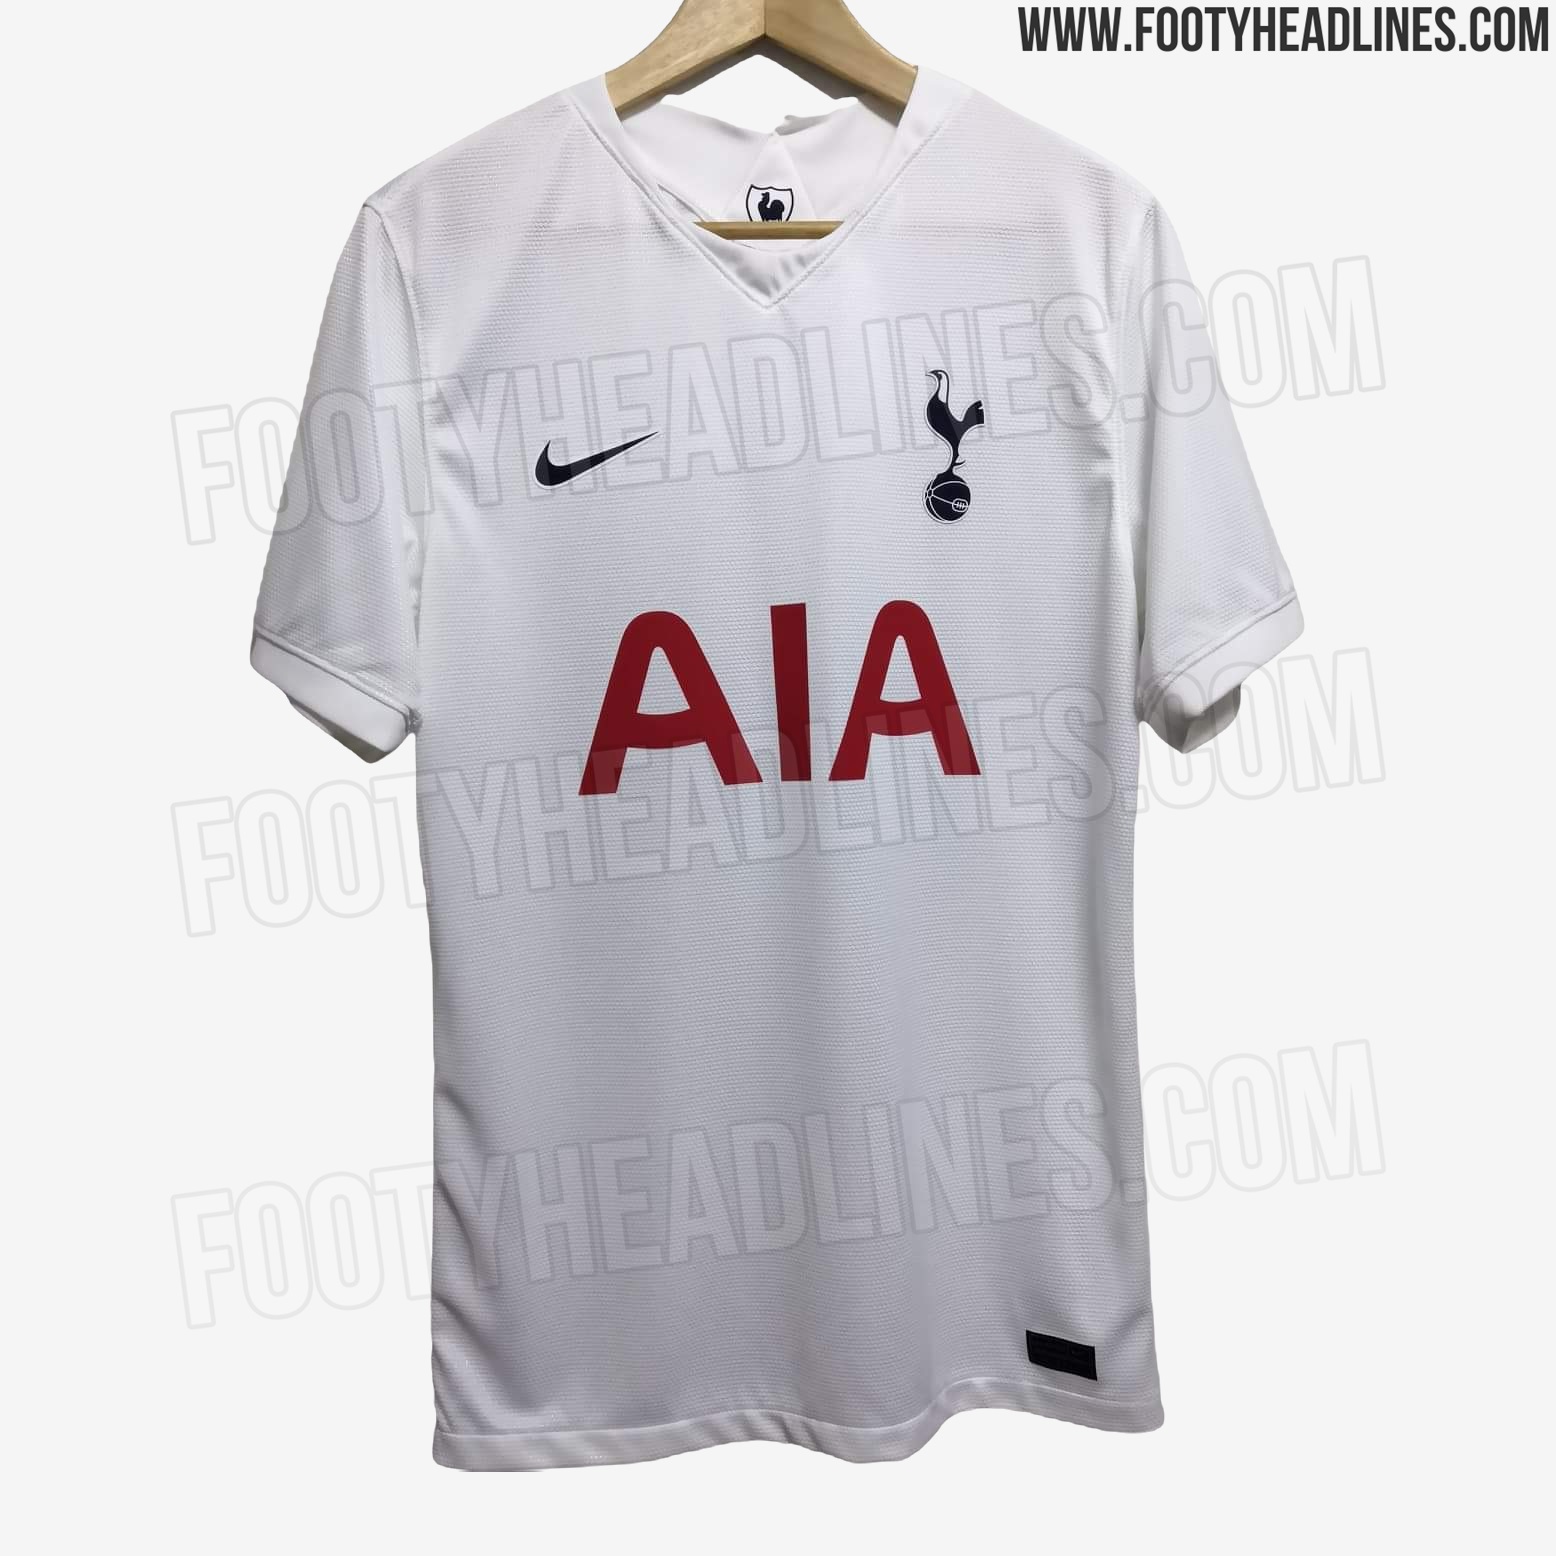 Footy headlines have new leaks of our 21/22 away kit including a picture of  the back : r/coys